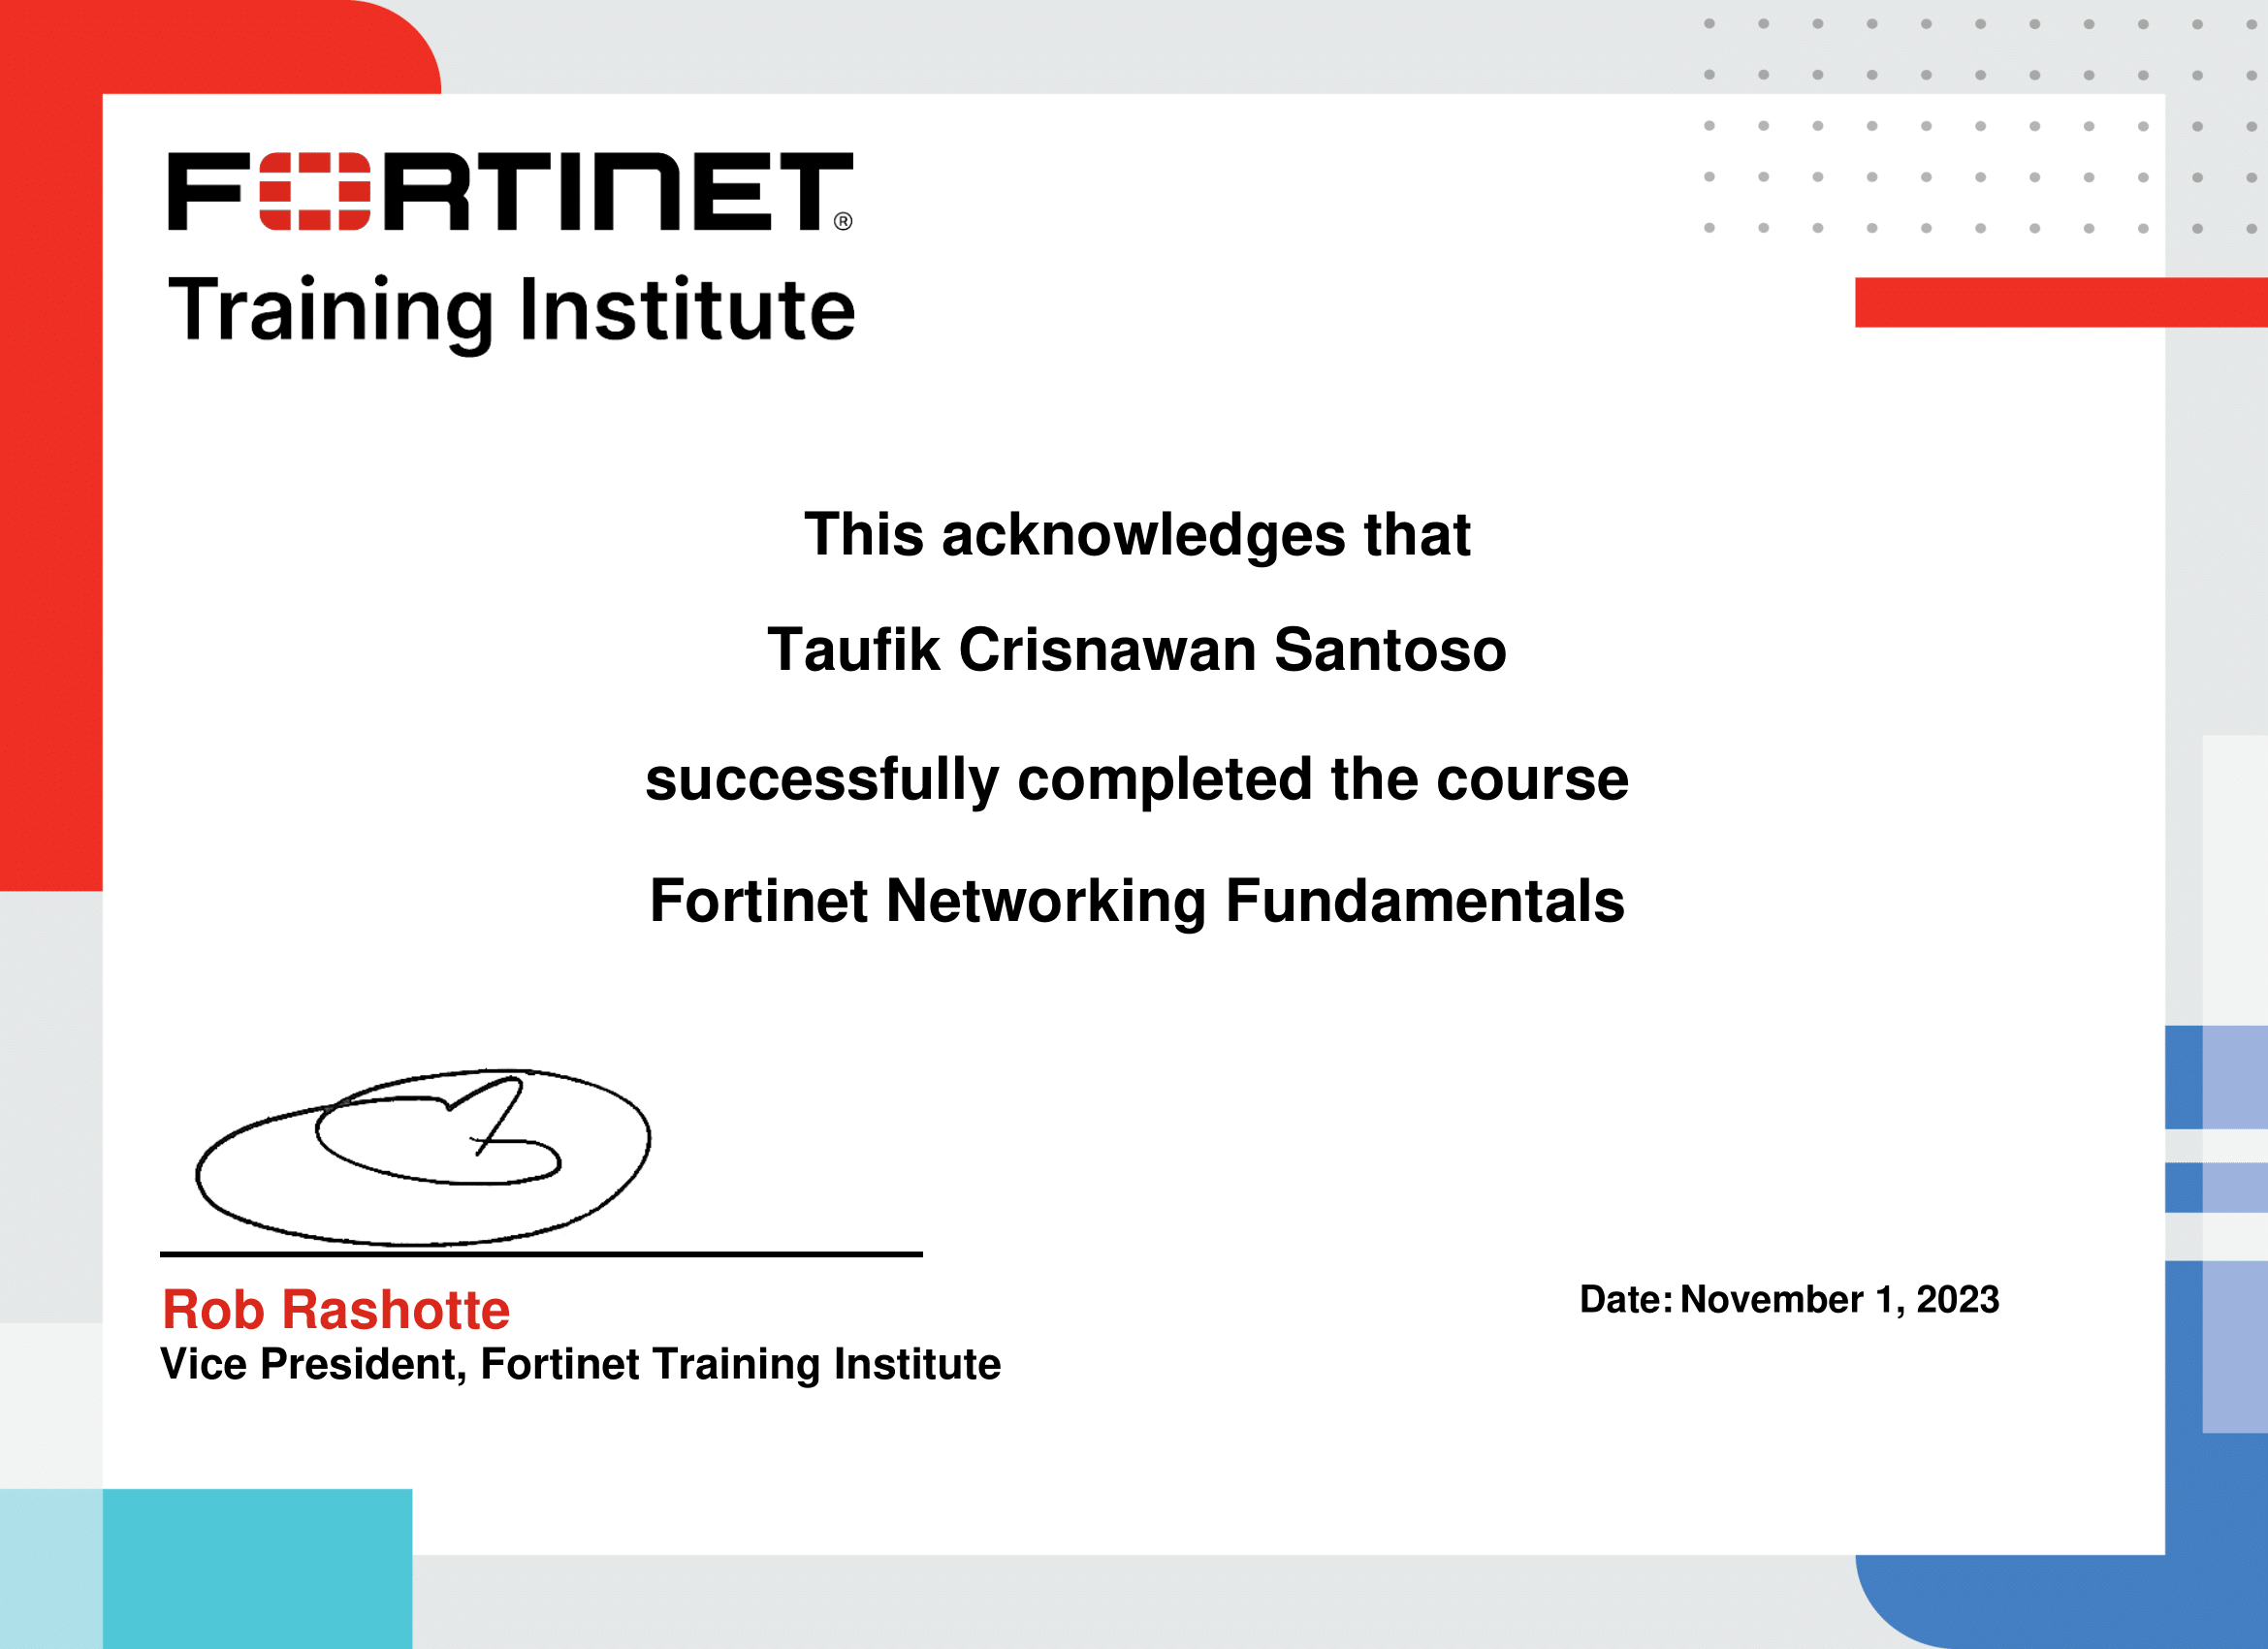 Fortinet Networking Fundamentals - Fortinet certificate